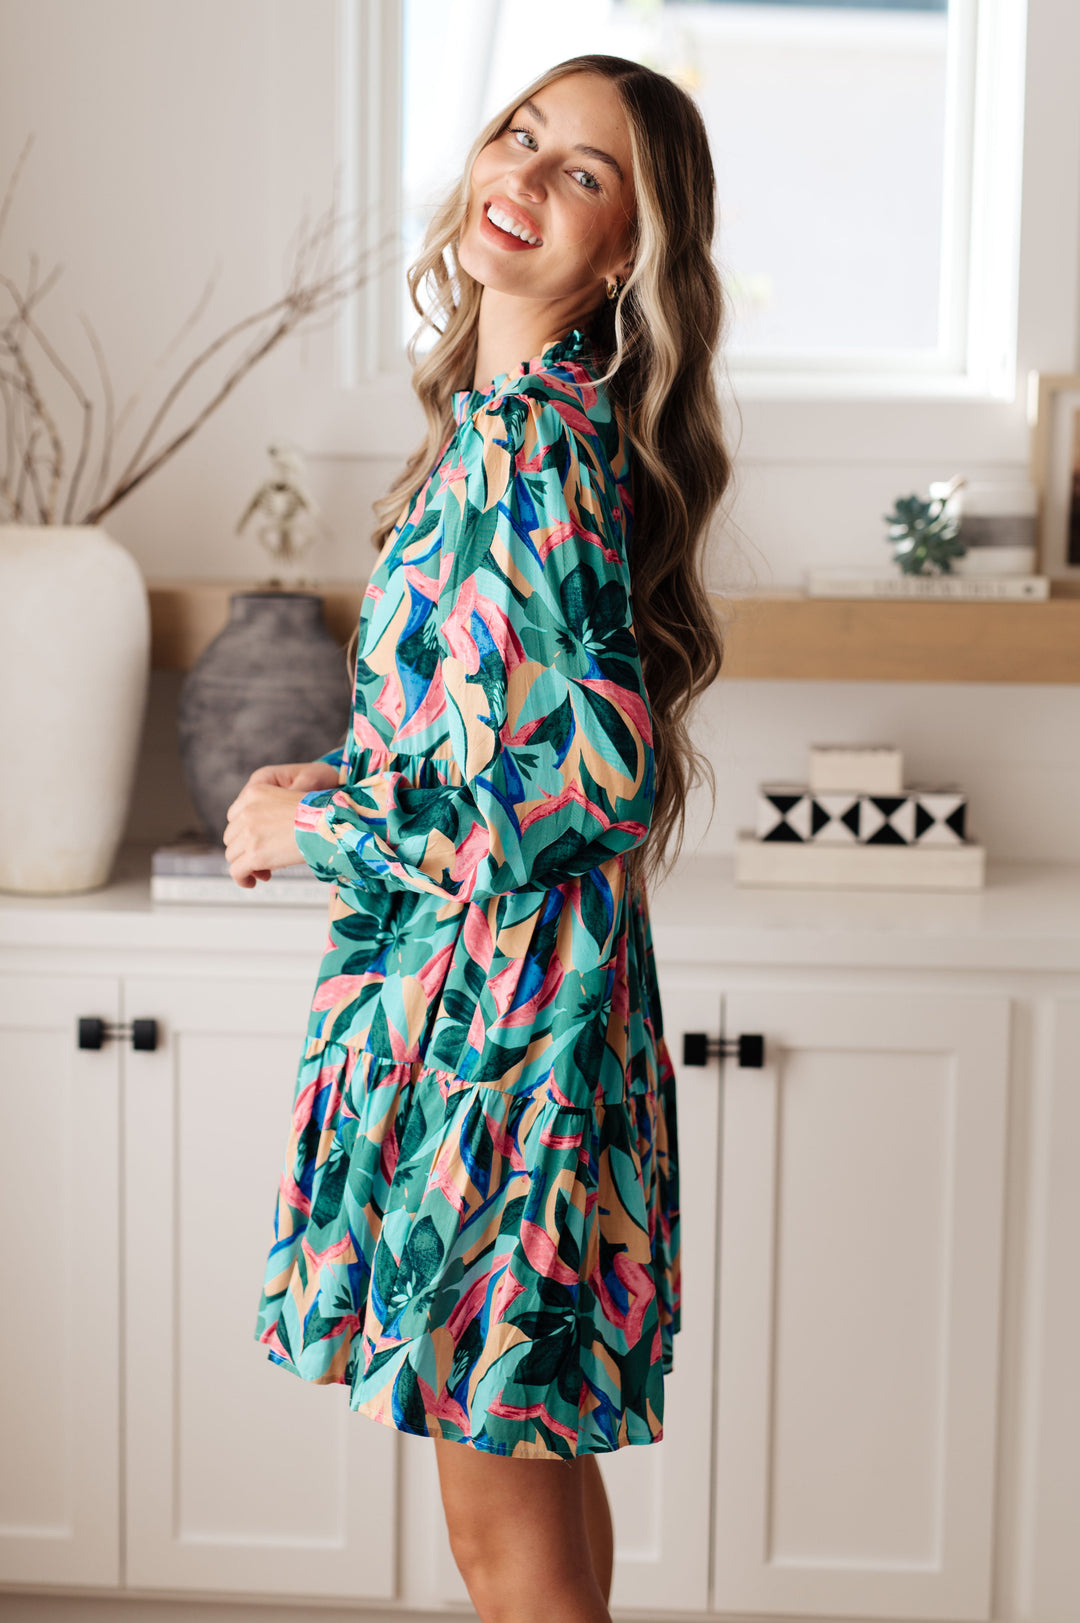 Thrill of it All Floral Dress